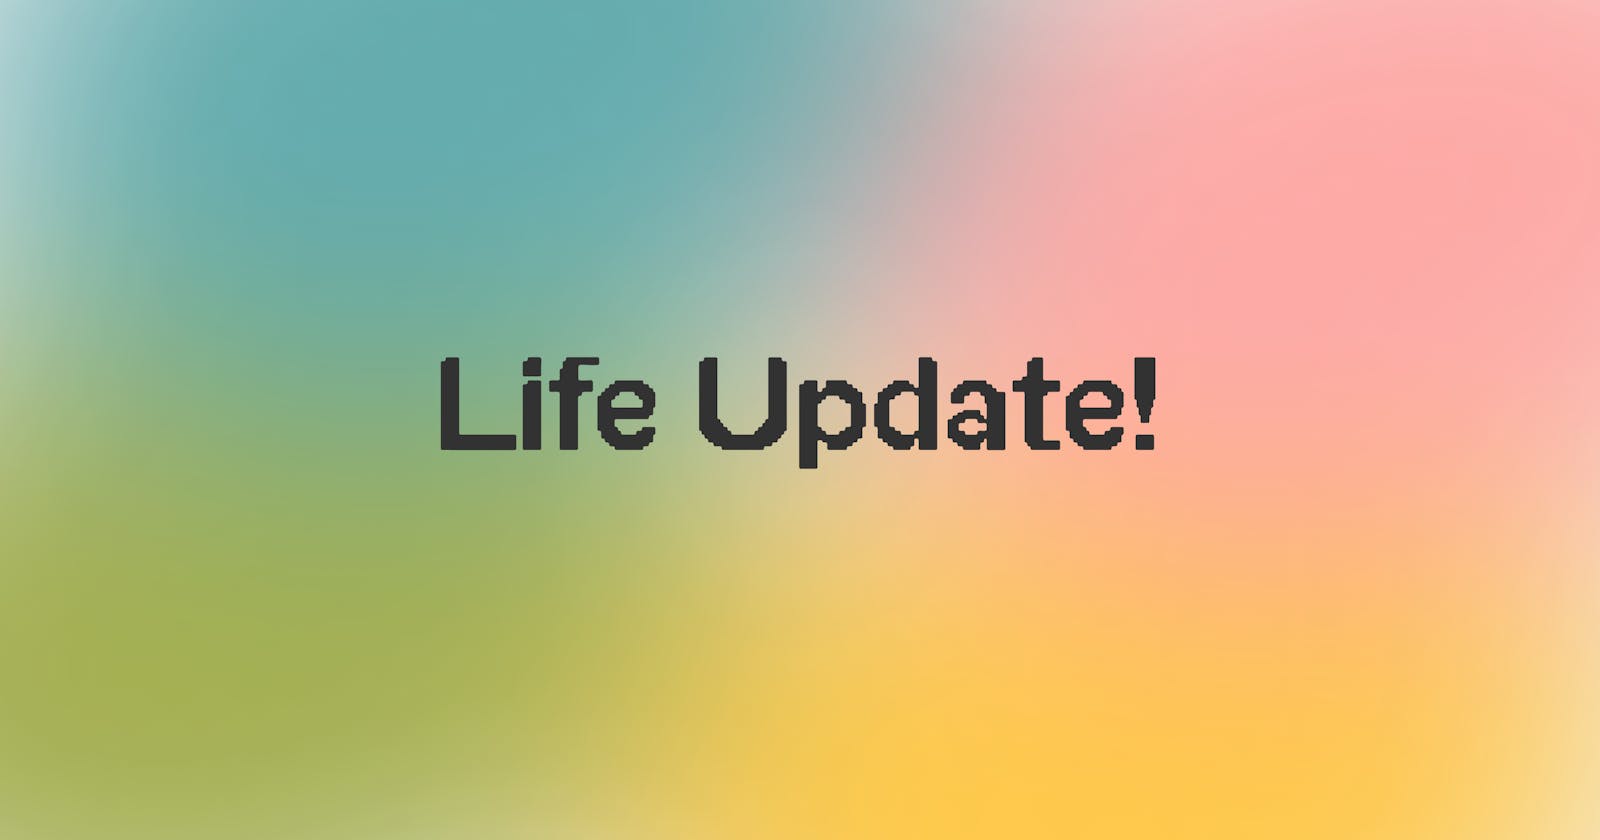 It's time for a life update!